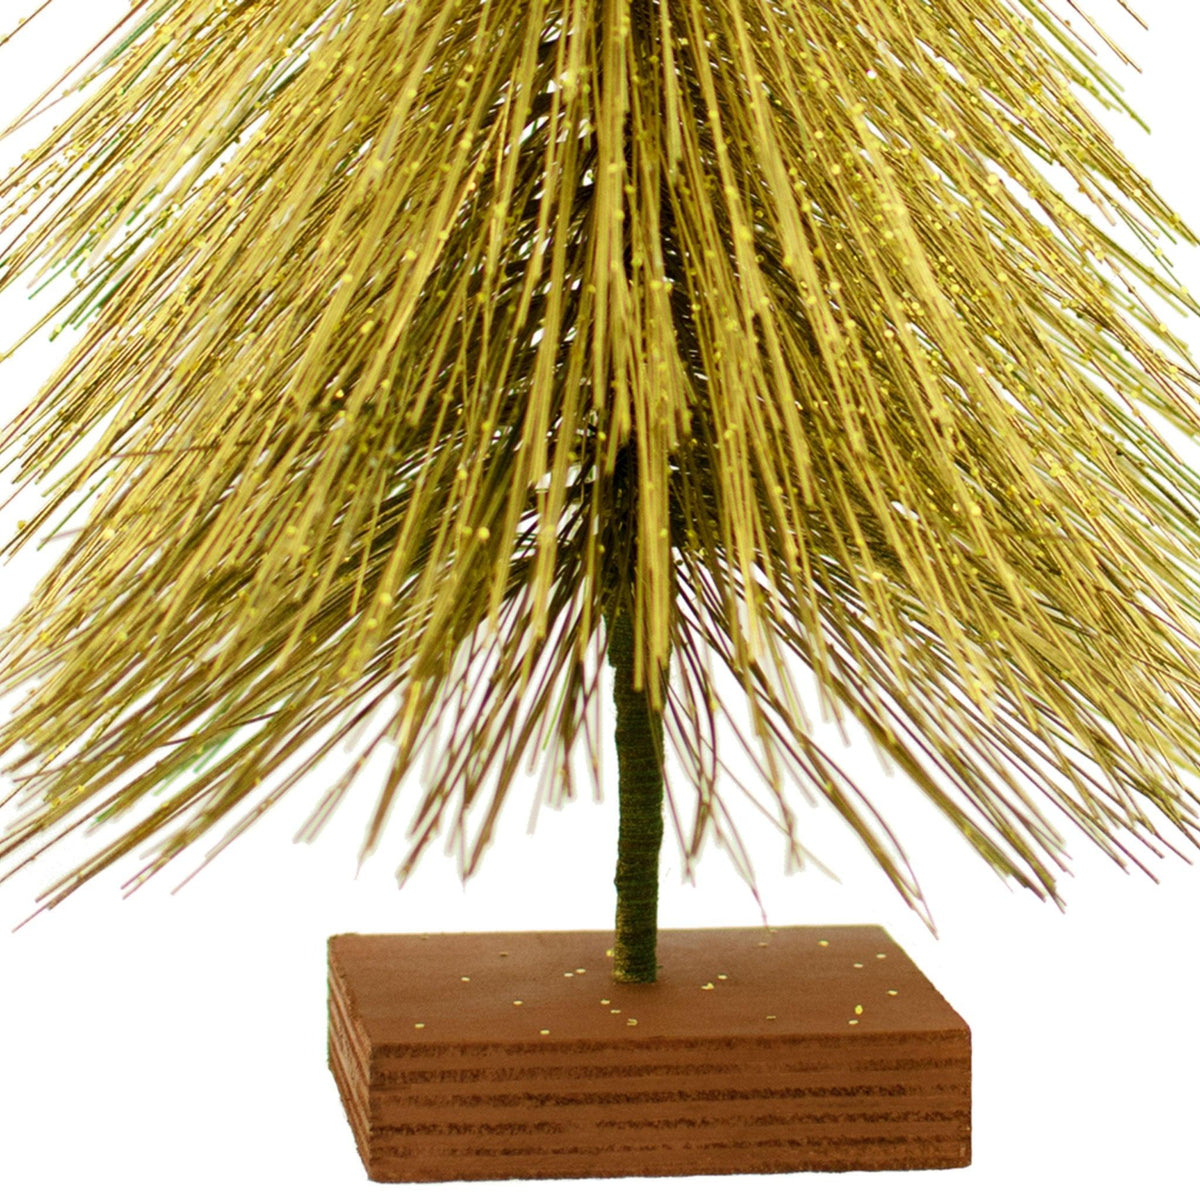 Mini Gold Bottlebrush Christmas Trees are sold at leedisplay.com. Trees are made with a wooden stand painted brown.